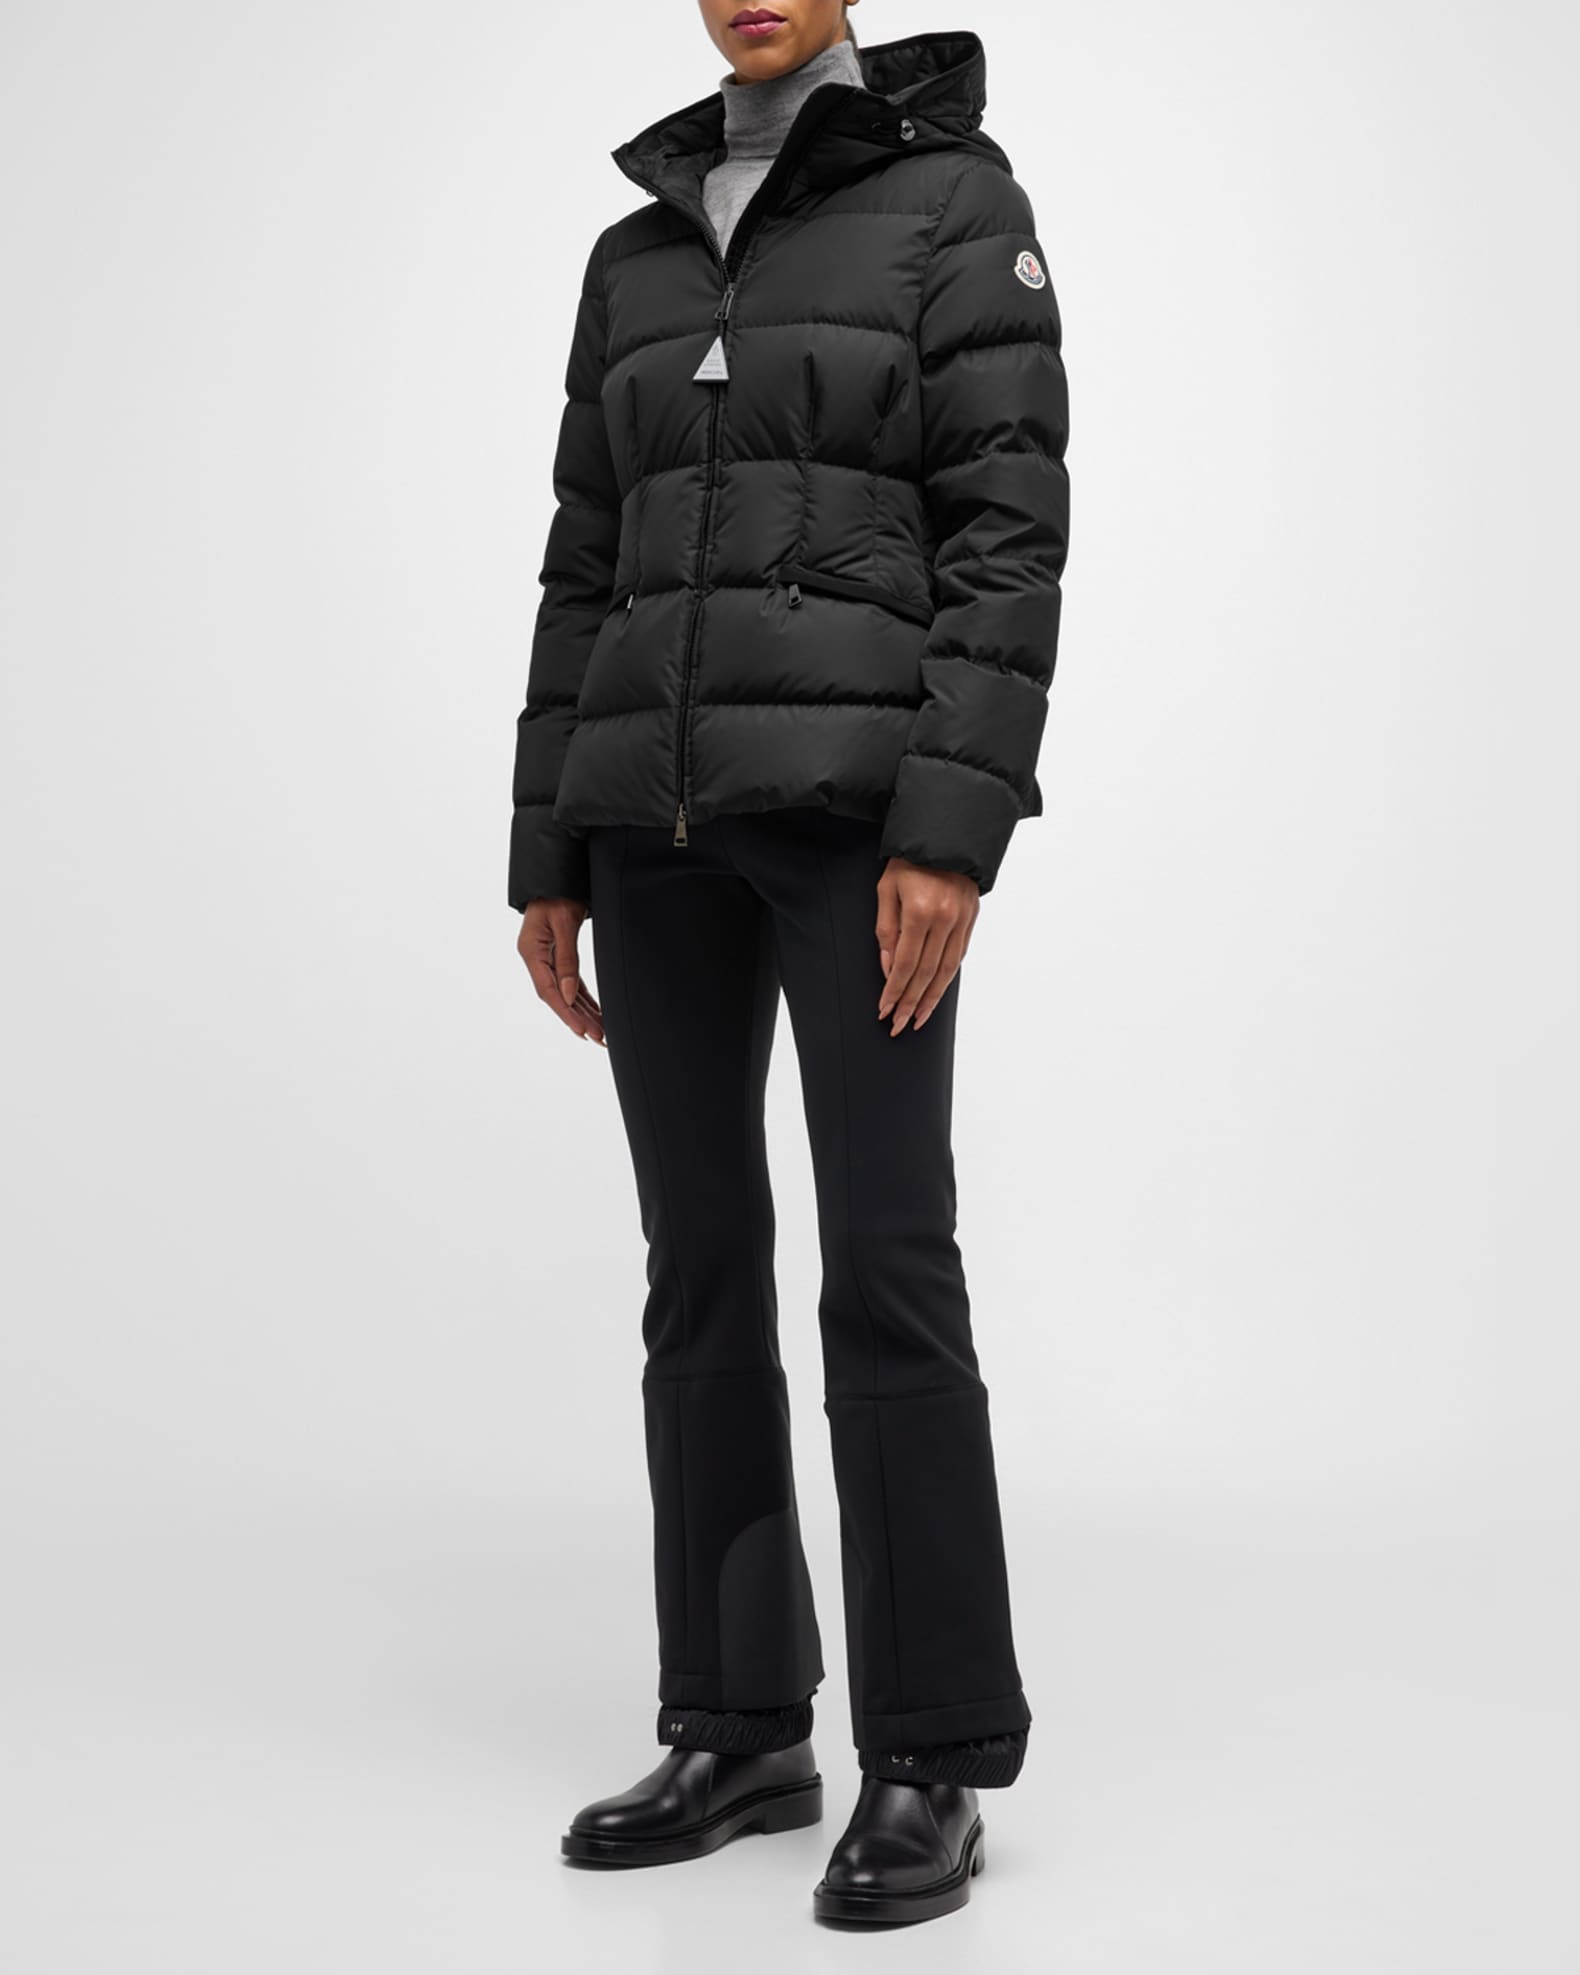 Moncler Avoce Hooded Puffer Jacket with Elastic Belt | Neiman Marcus